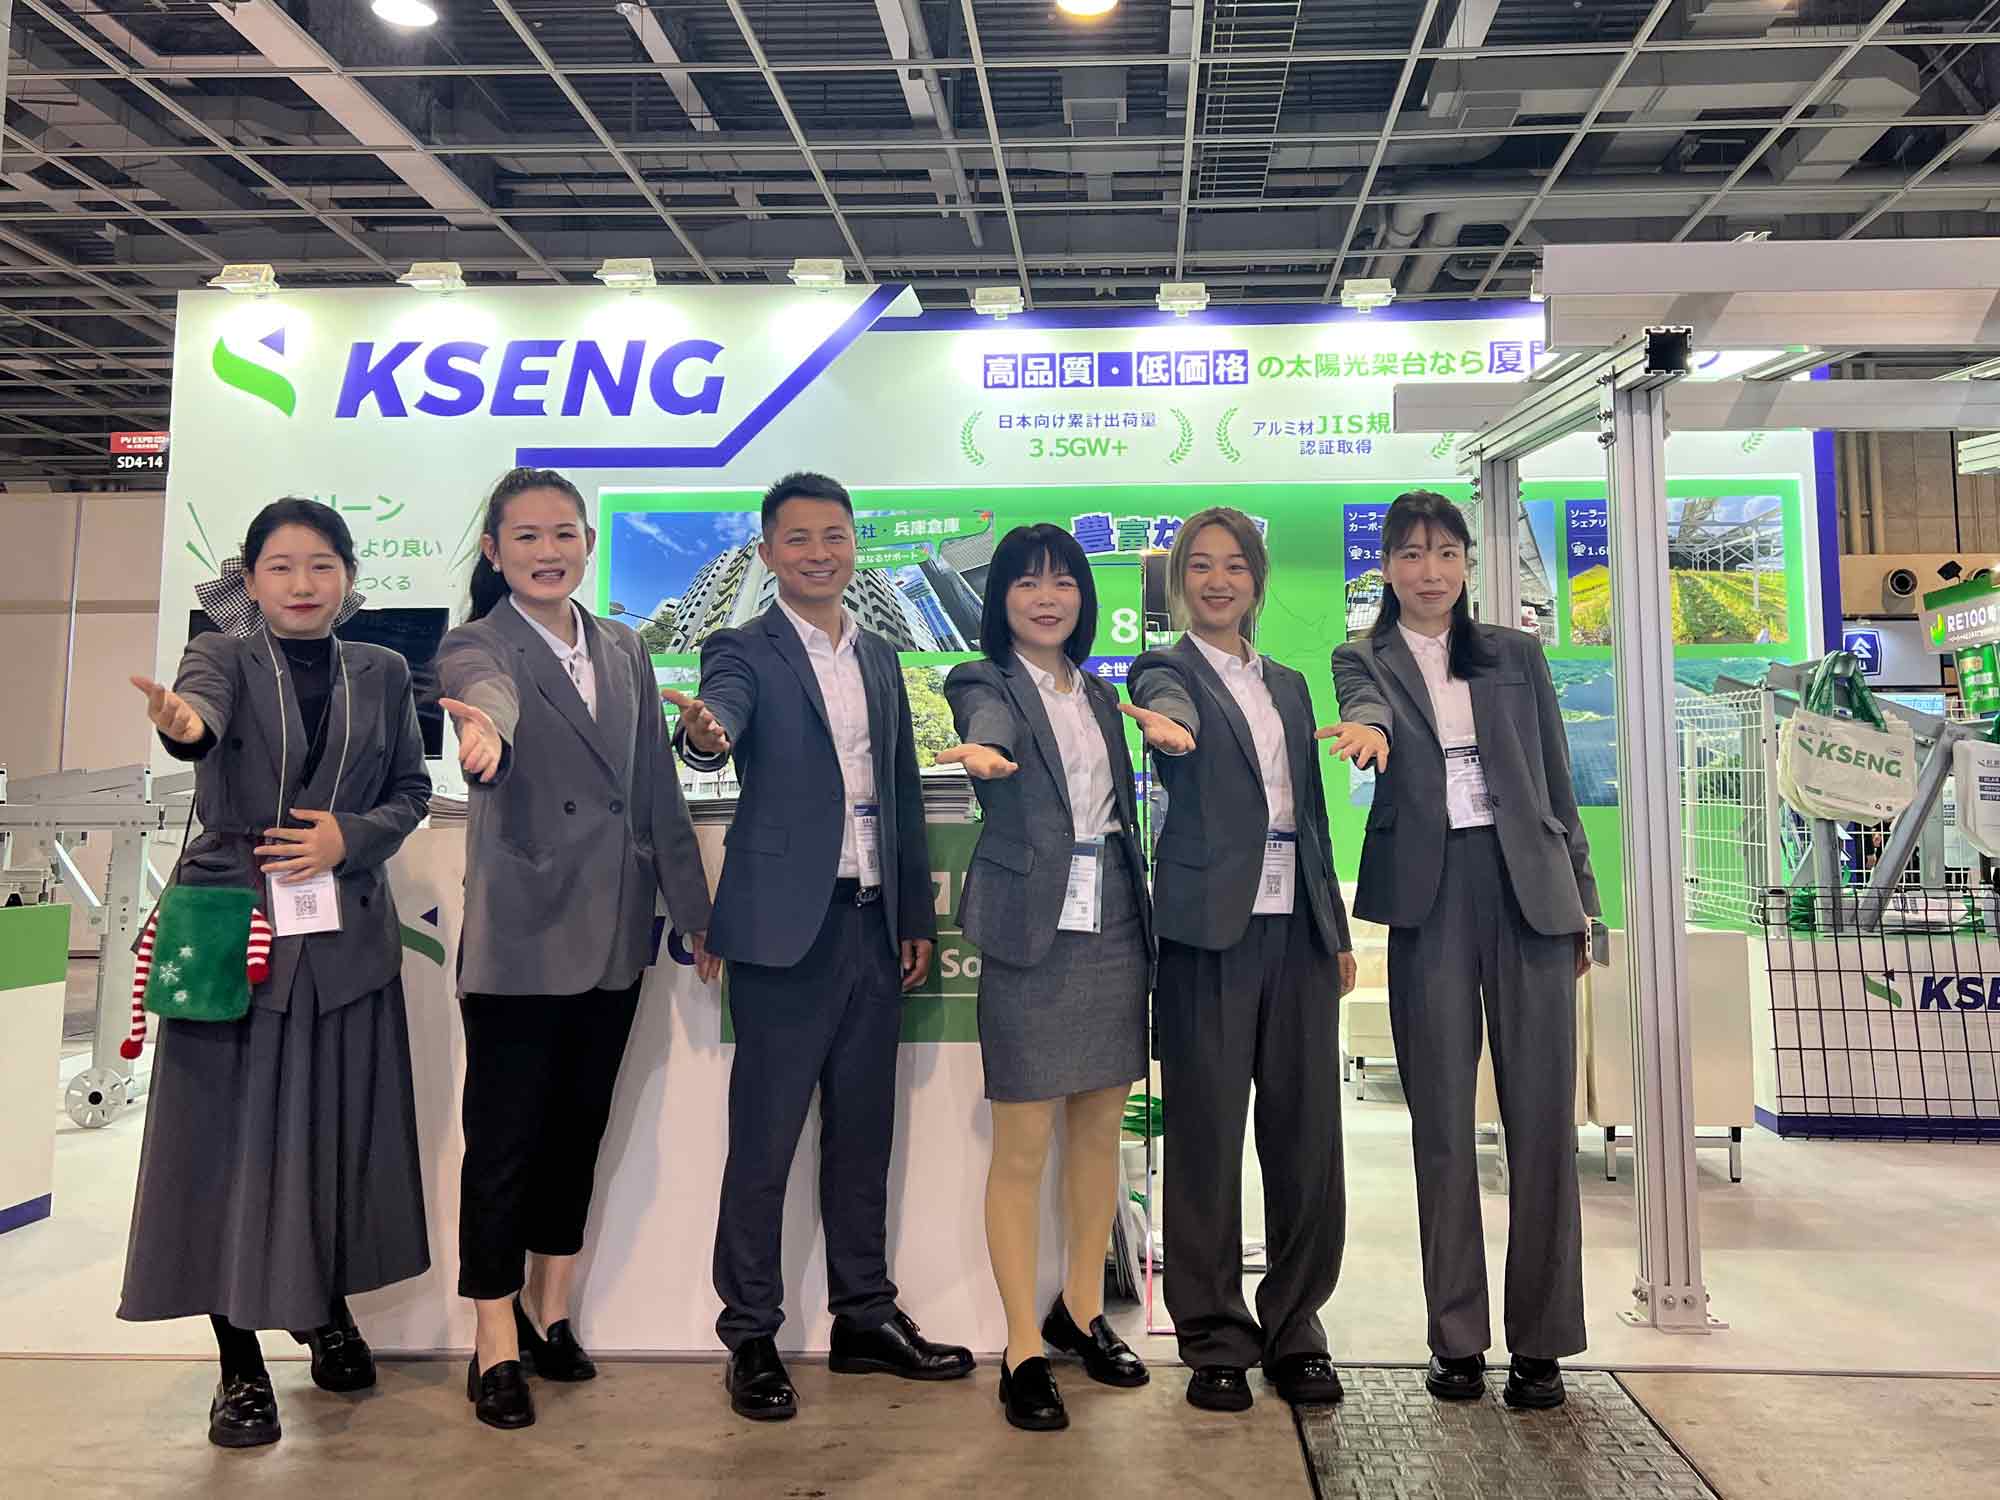 Kseng Solar Marks Presence with Its Latest Solar Racking Solution at PVS Asian in Indonesia and PV EXPO Osaka in Japan